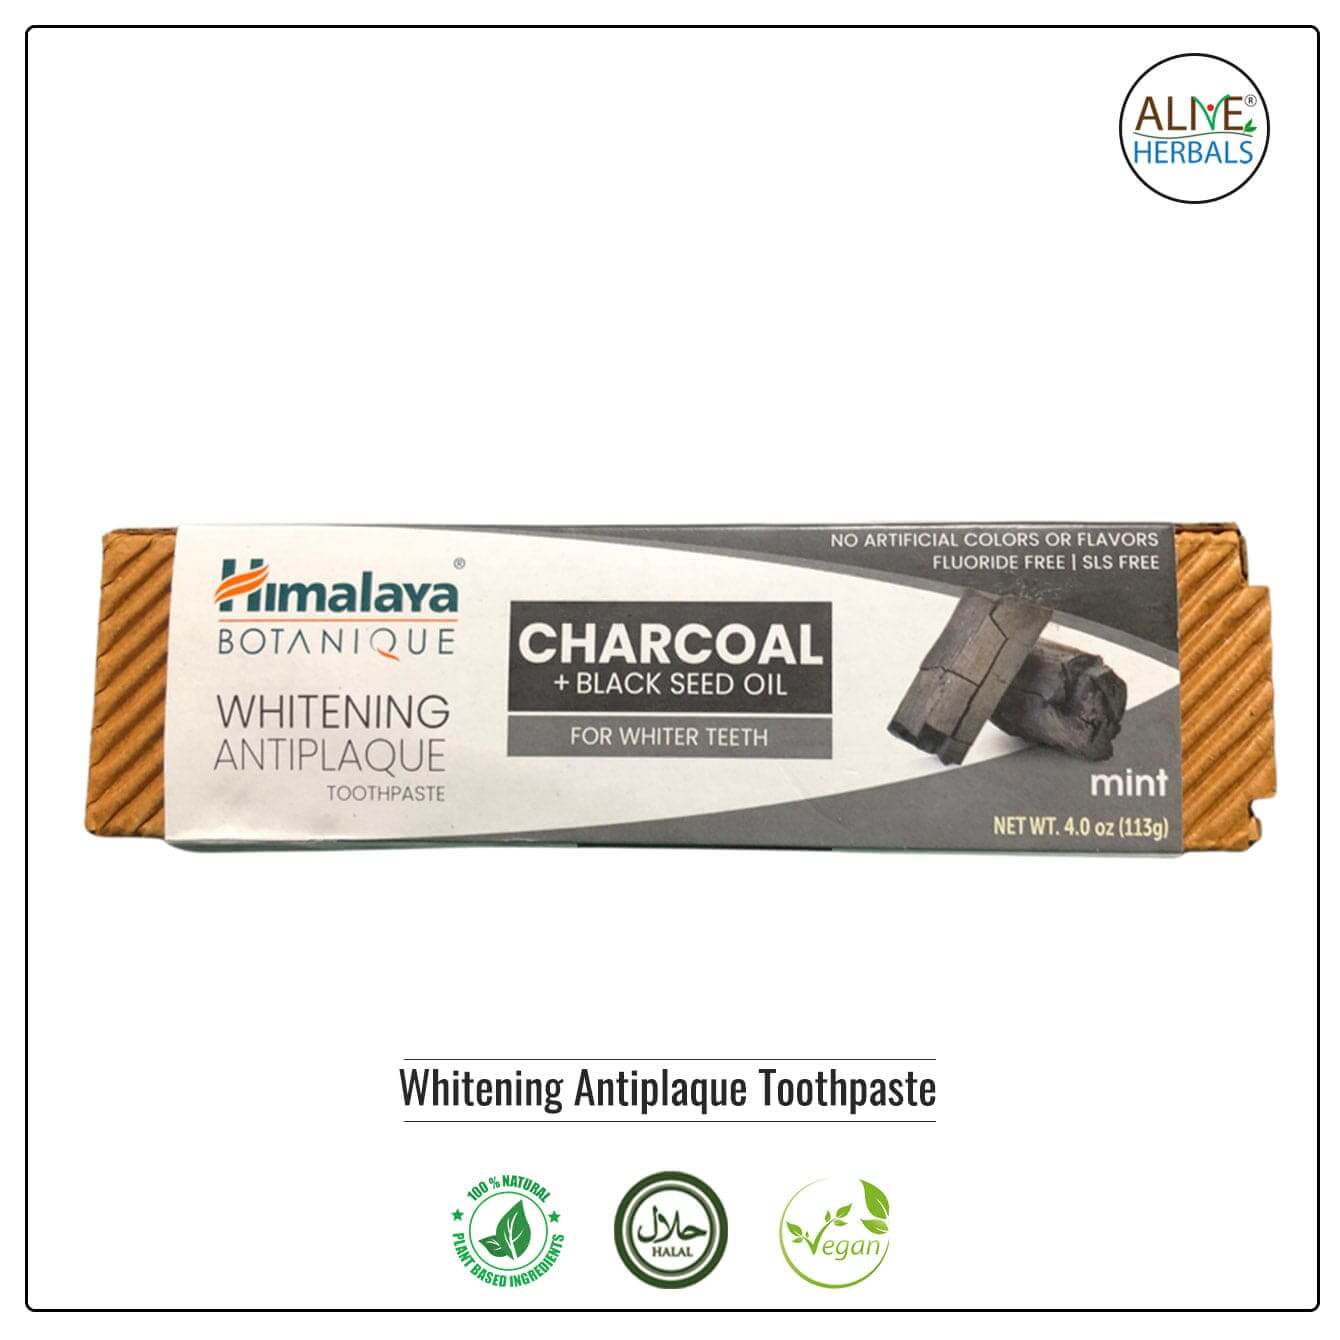 Whitening Antiplaque Toothpaste - Buy at Natural Food Store | Alive Herbals.